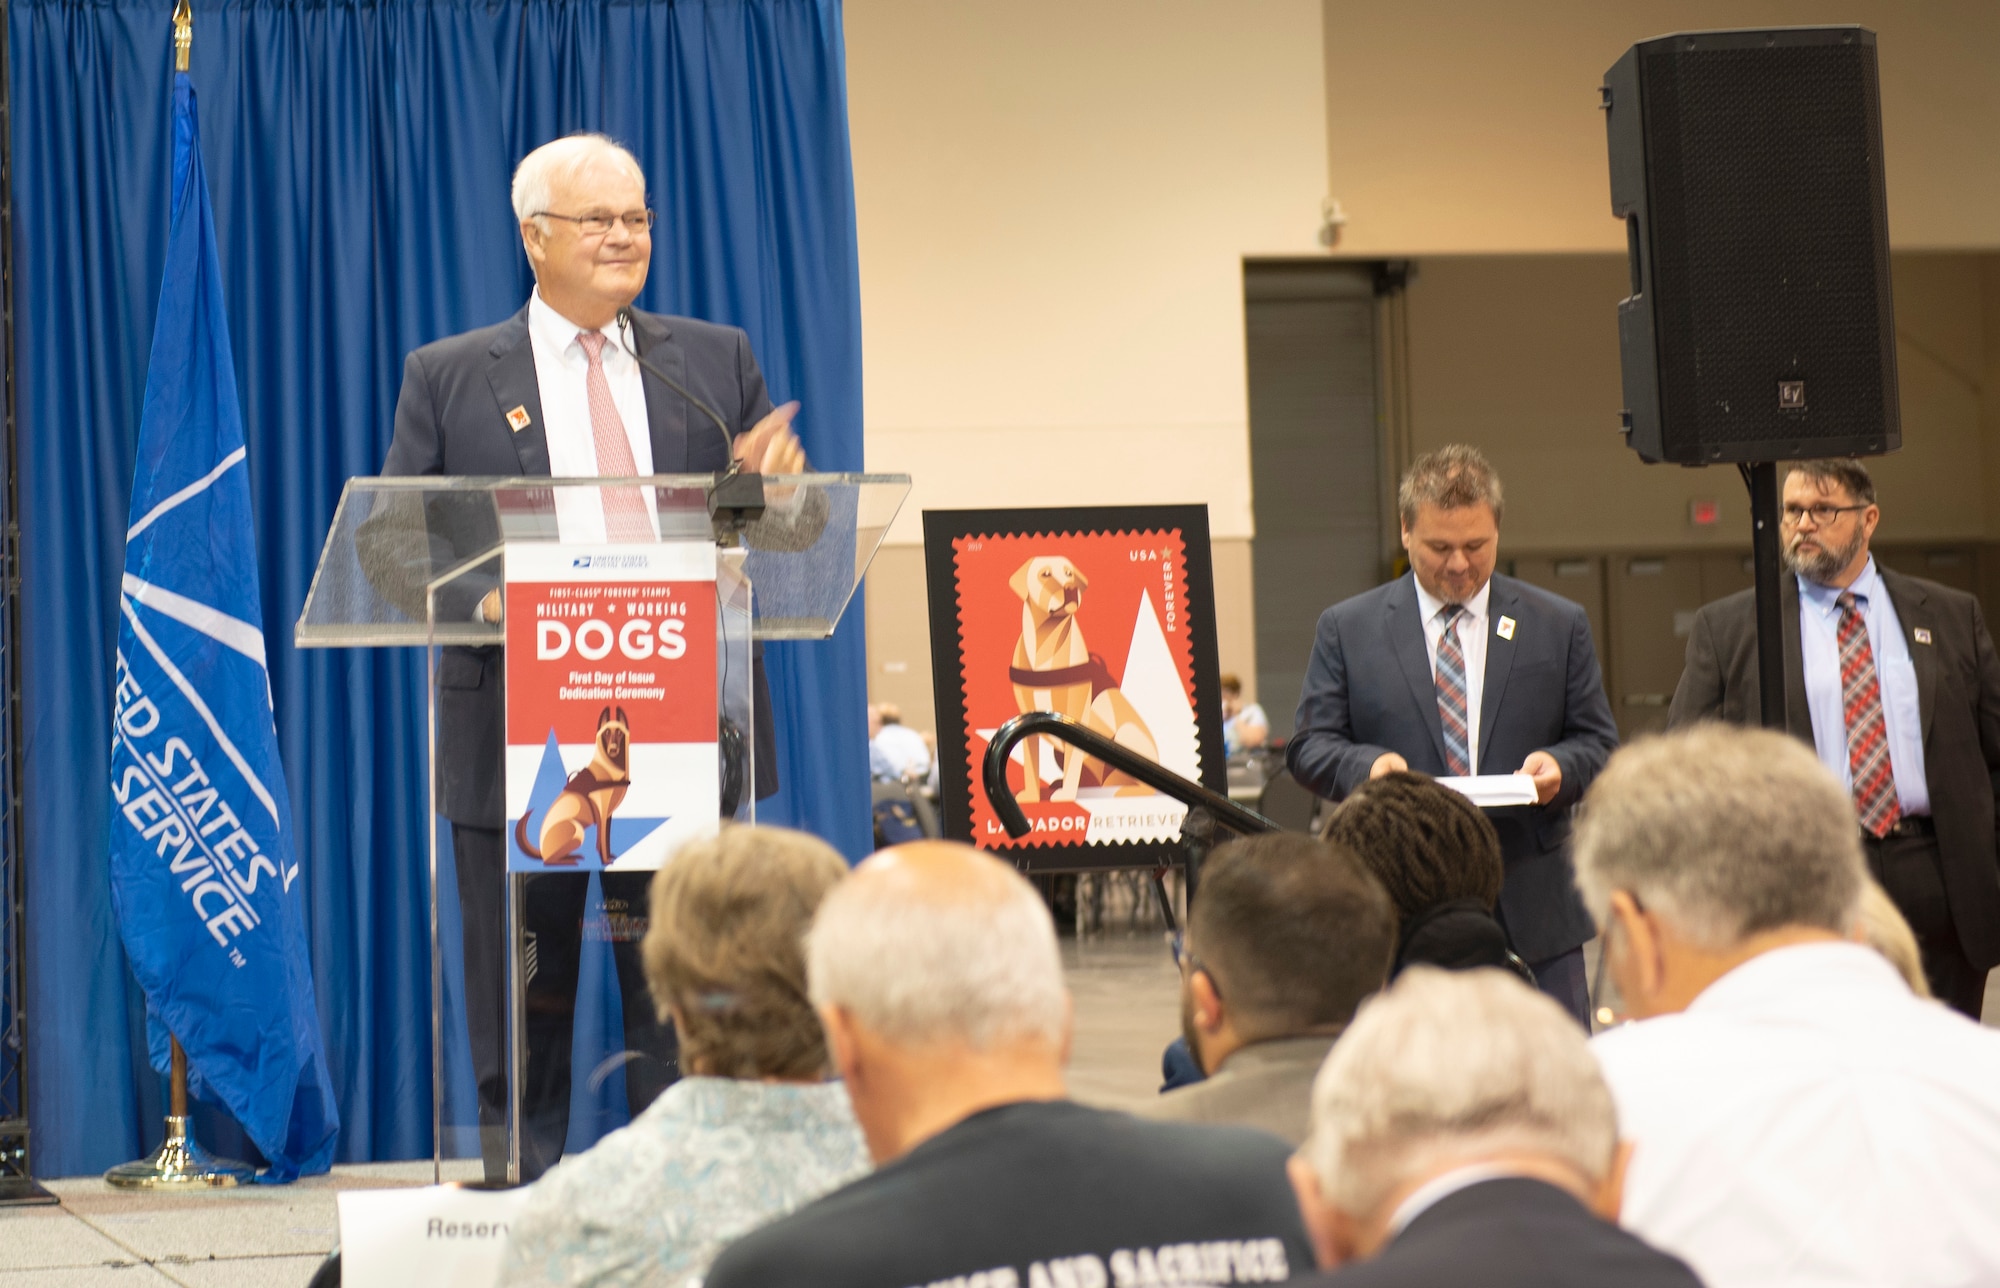 David C. Williams, United States Postal Service Board of Governors vice chairman, speaks at the unveiling of the Military Working Dog stamp Aug. 1, 2019, at the Catholic Health Initiatives Health Center in Omaha, Nebraska. The ceremony was held during the American Philatelic Society’s 133rd annual convention. (U.S. Air Force photo by L. Cunningham)